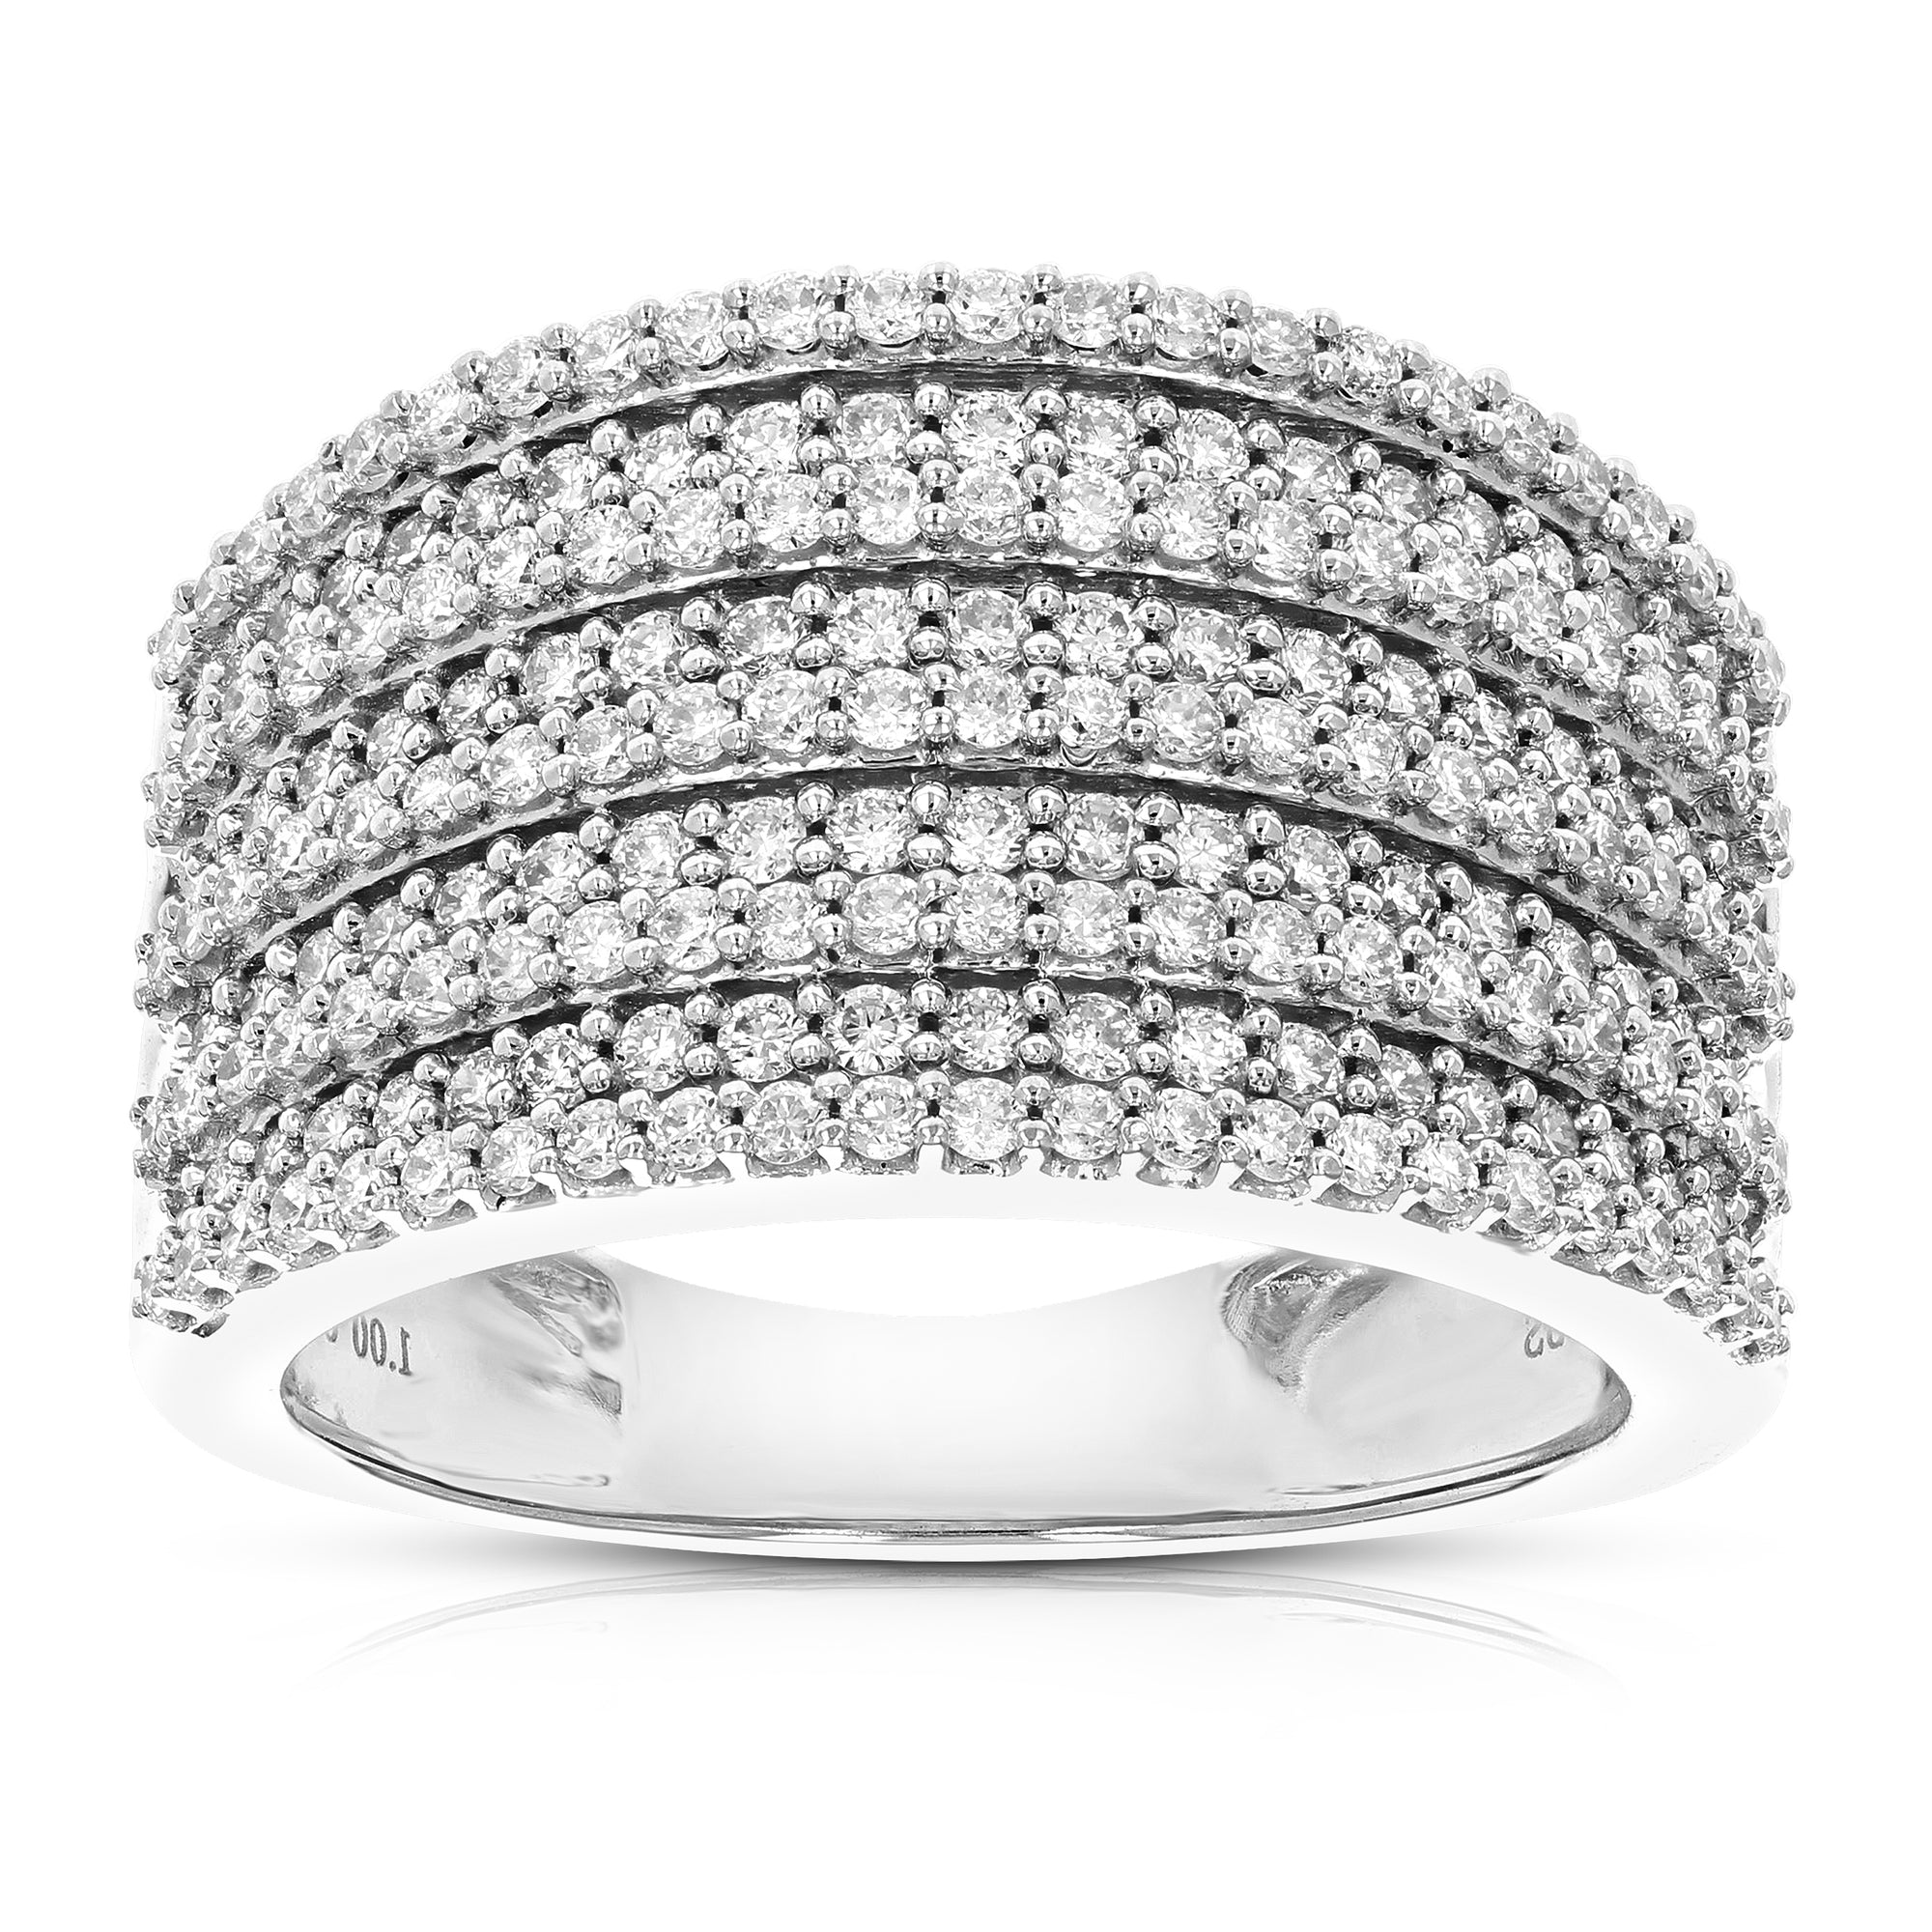 1 cttw Diamond Wedding Band for Women, Round Lab Grown Diamond Ring in 0.925 Sterling Silver, Prong Setting, Size 5-9